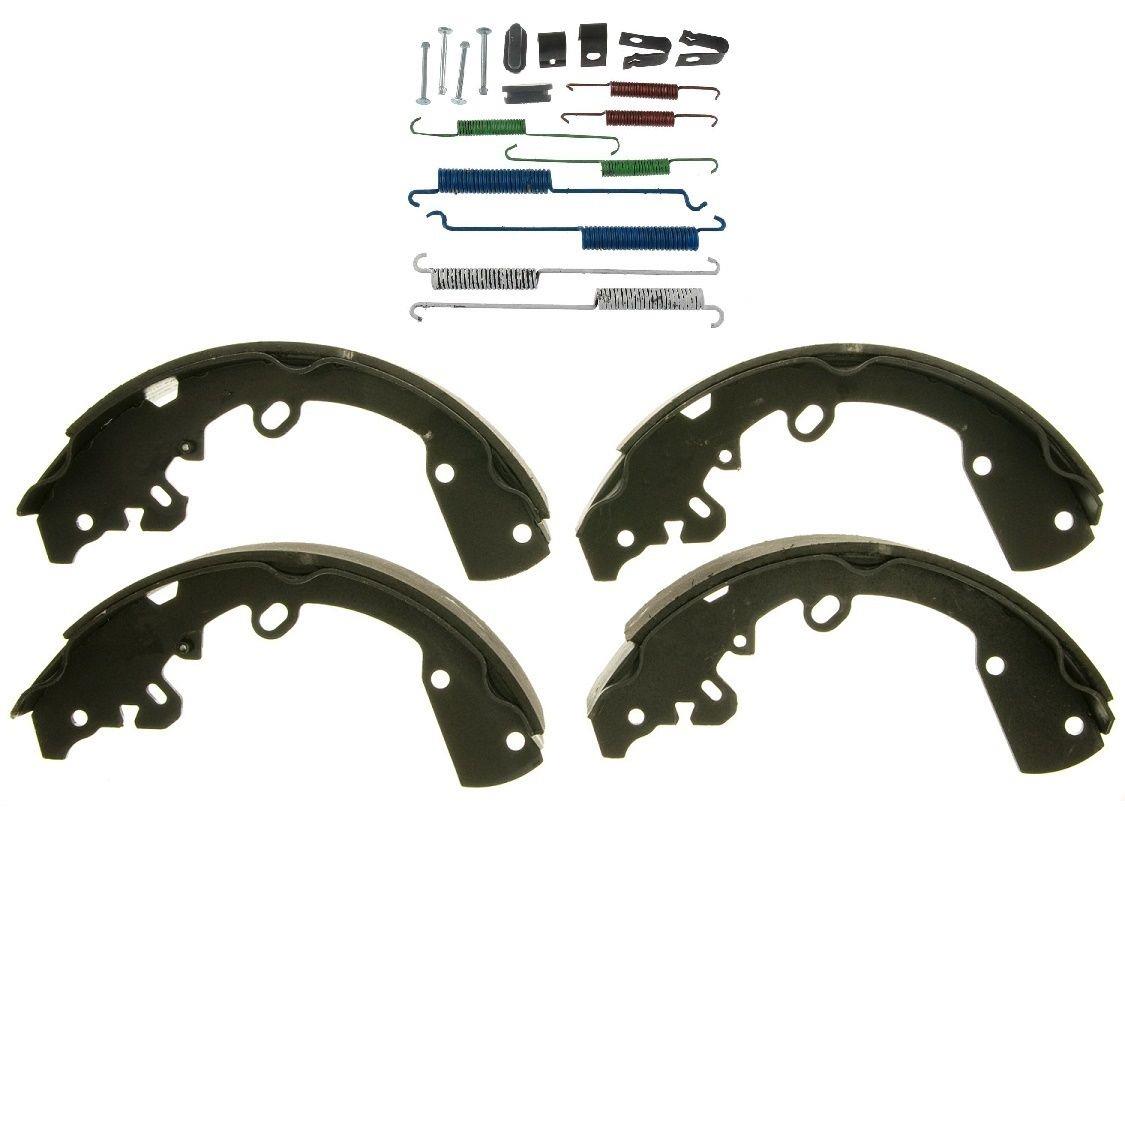 Brake Drum shoes and spring kit fits 1995-2003 Ford Windstar